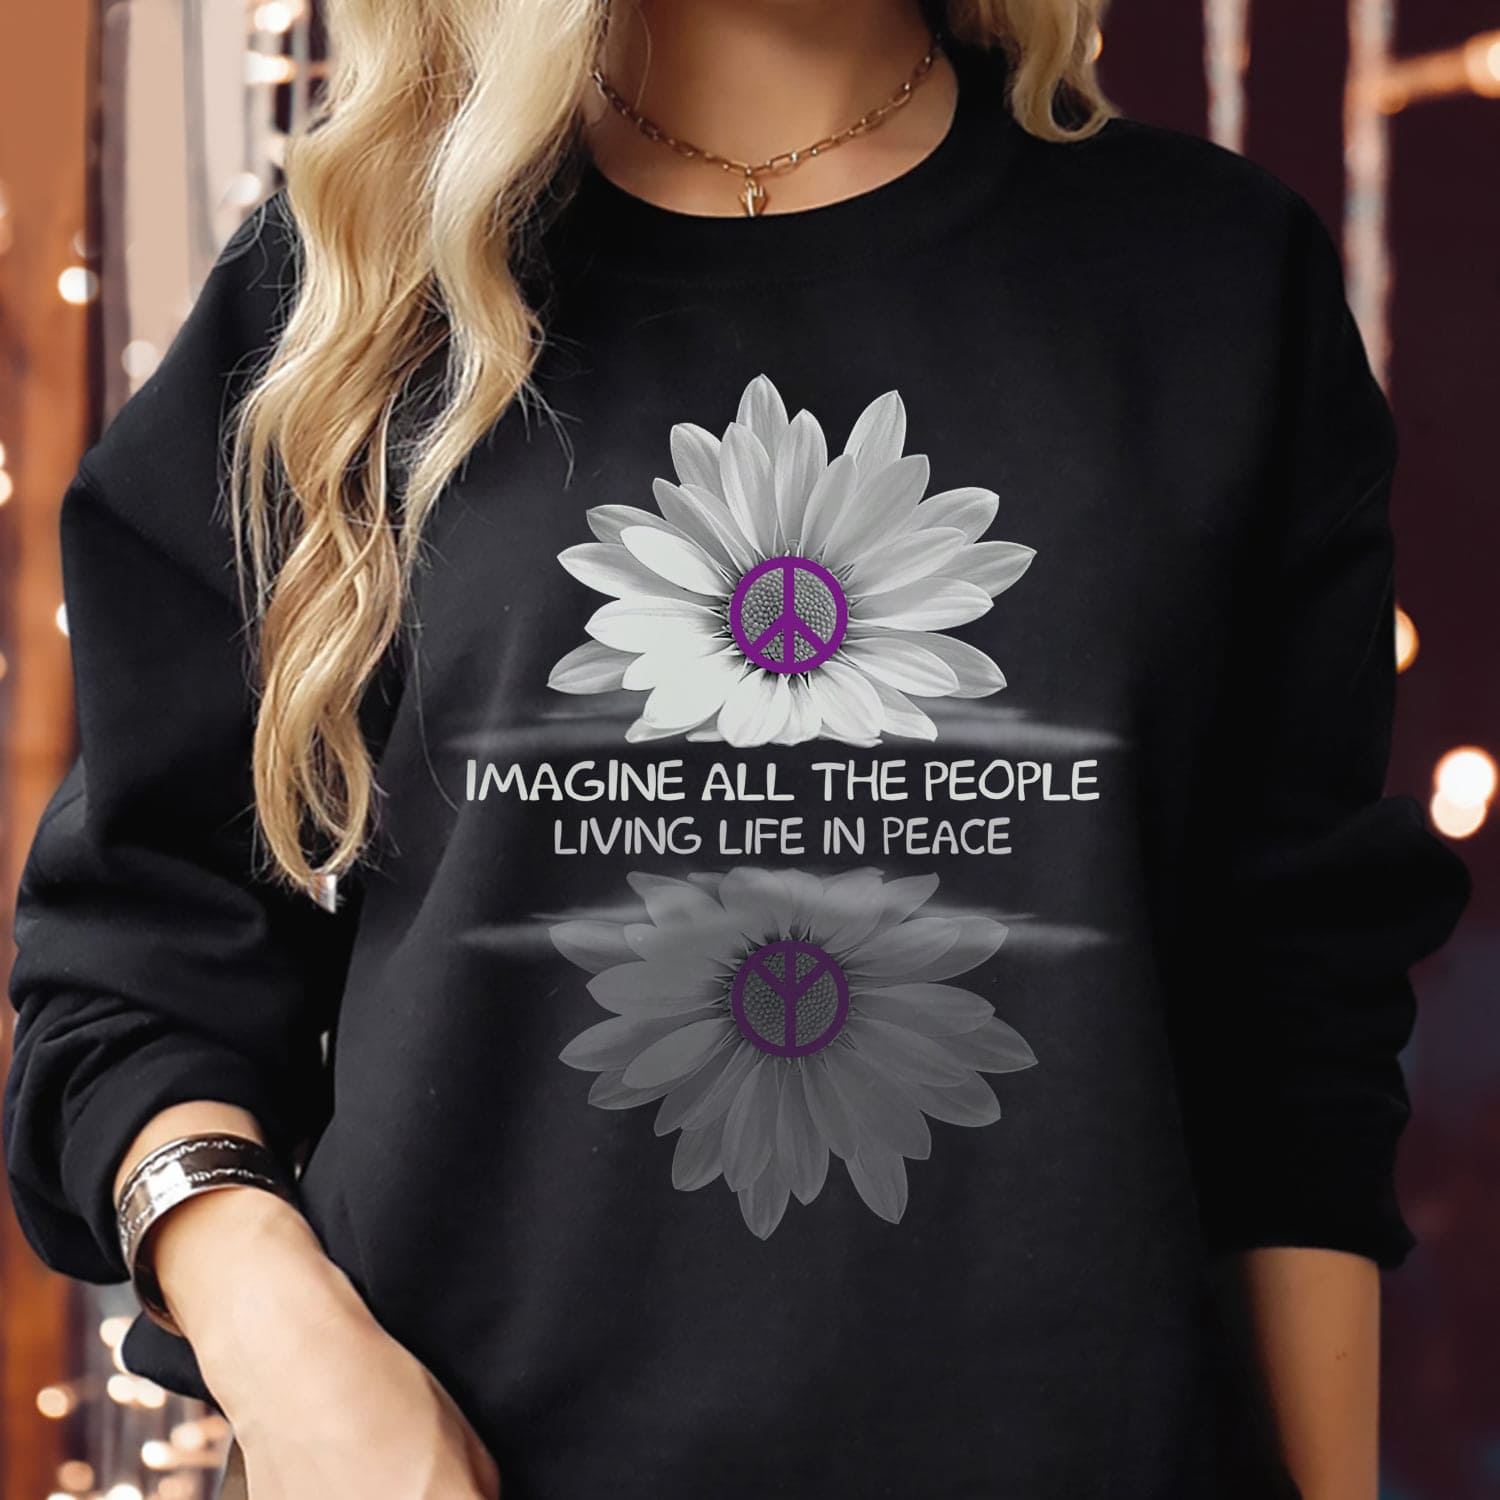 Imagine all the people living life in peace - Peaceful life, peaceful flower symbol